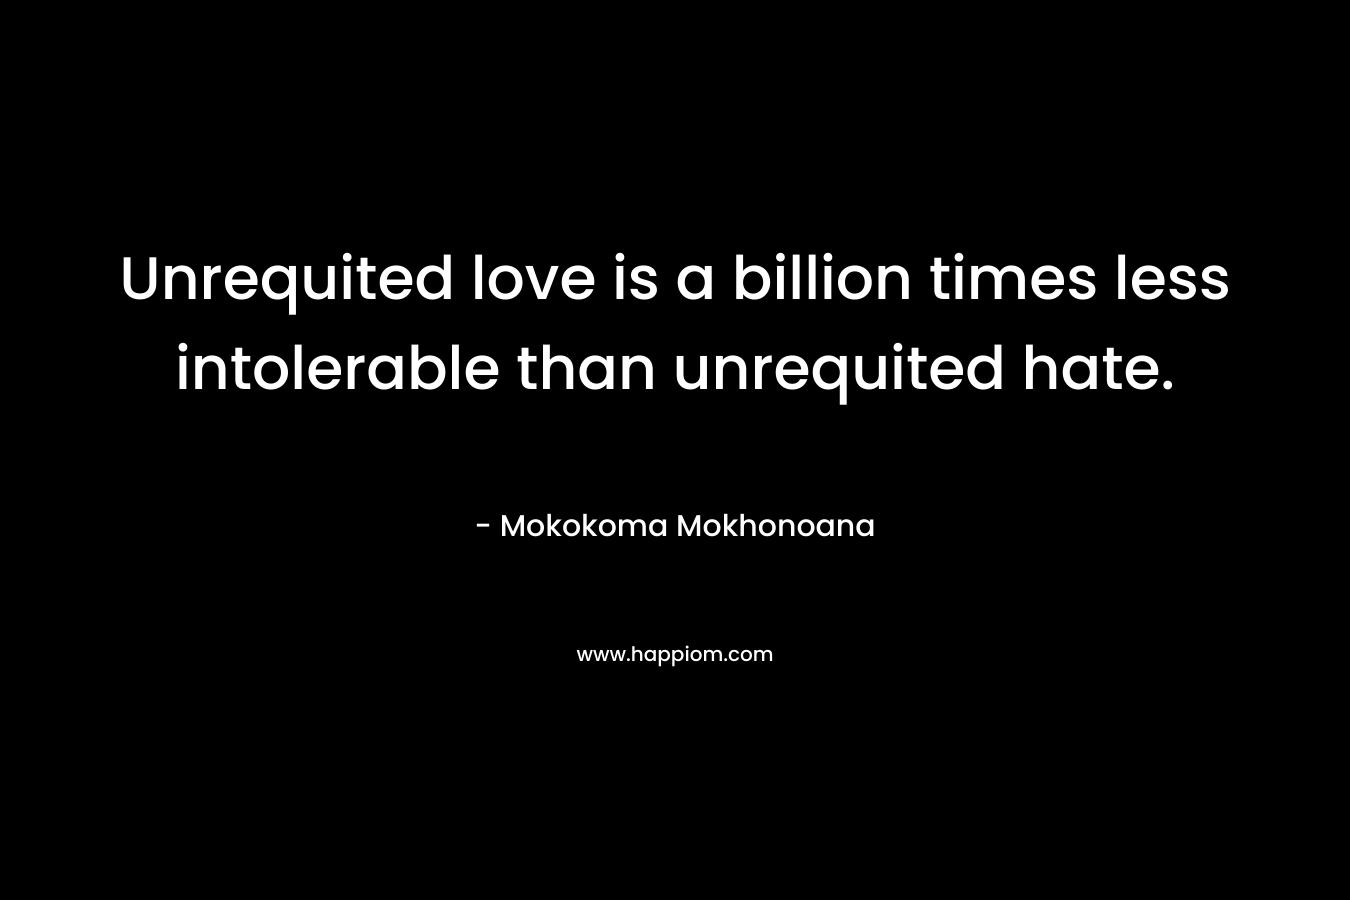 Unrequited love is a billion times less intolerable than unrequited hate.